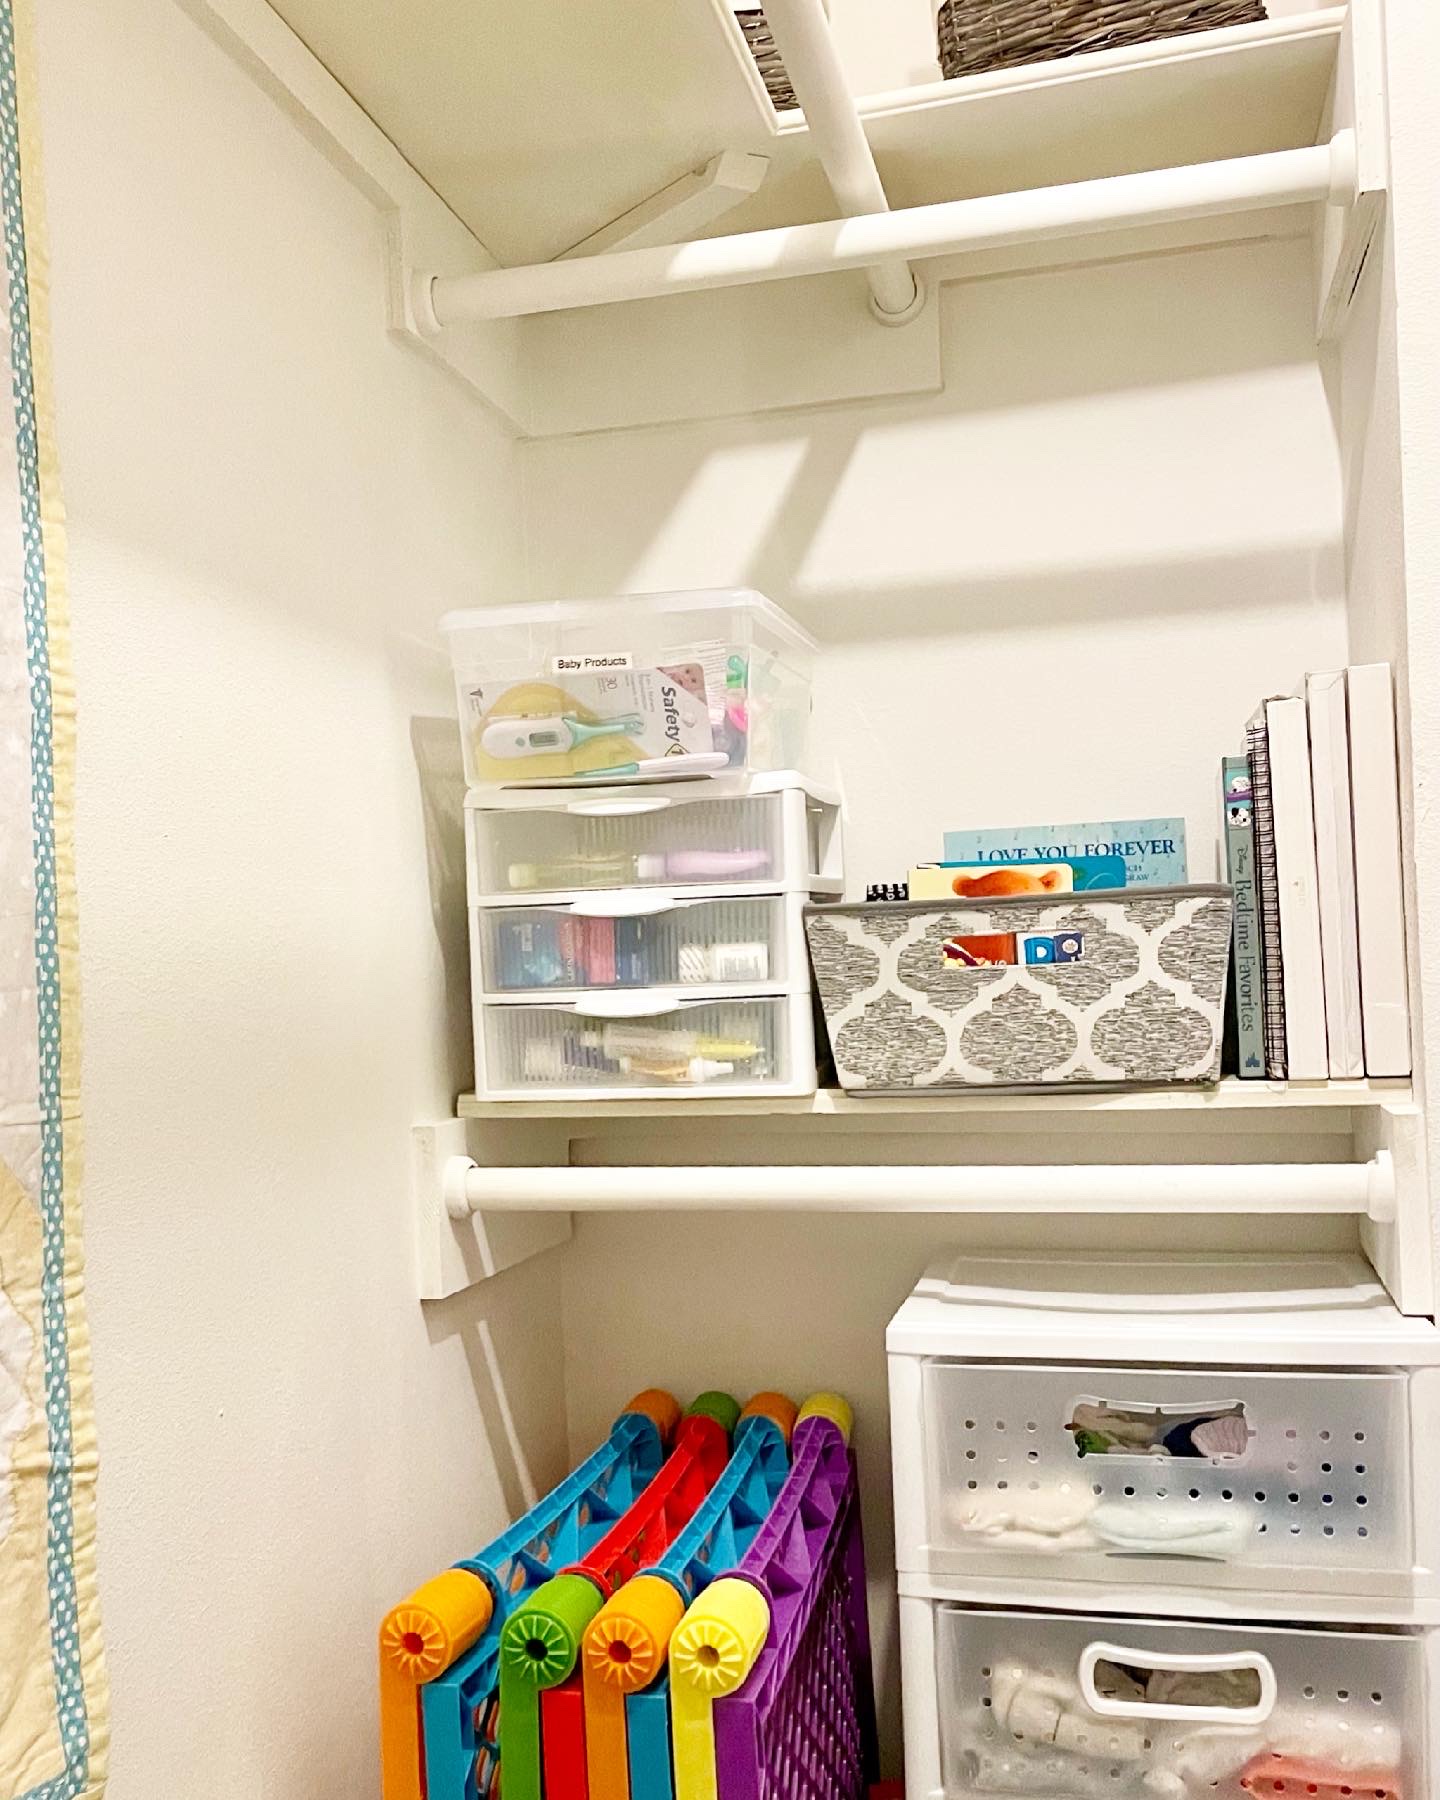 Memorial home organizing services - closet after